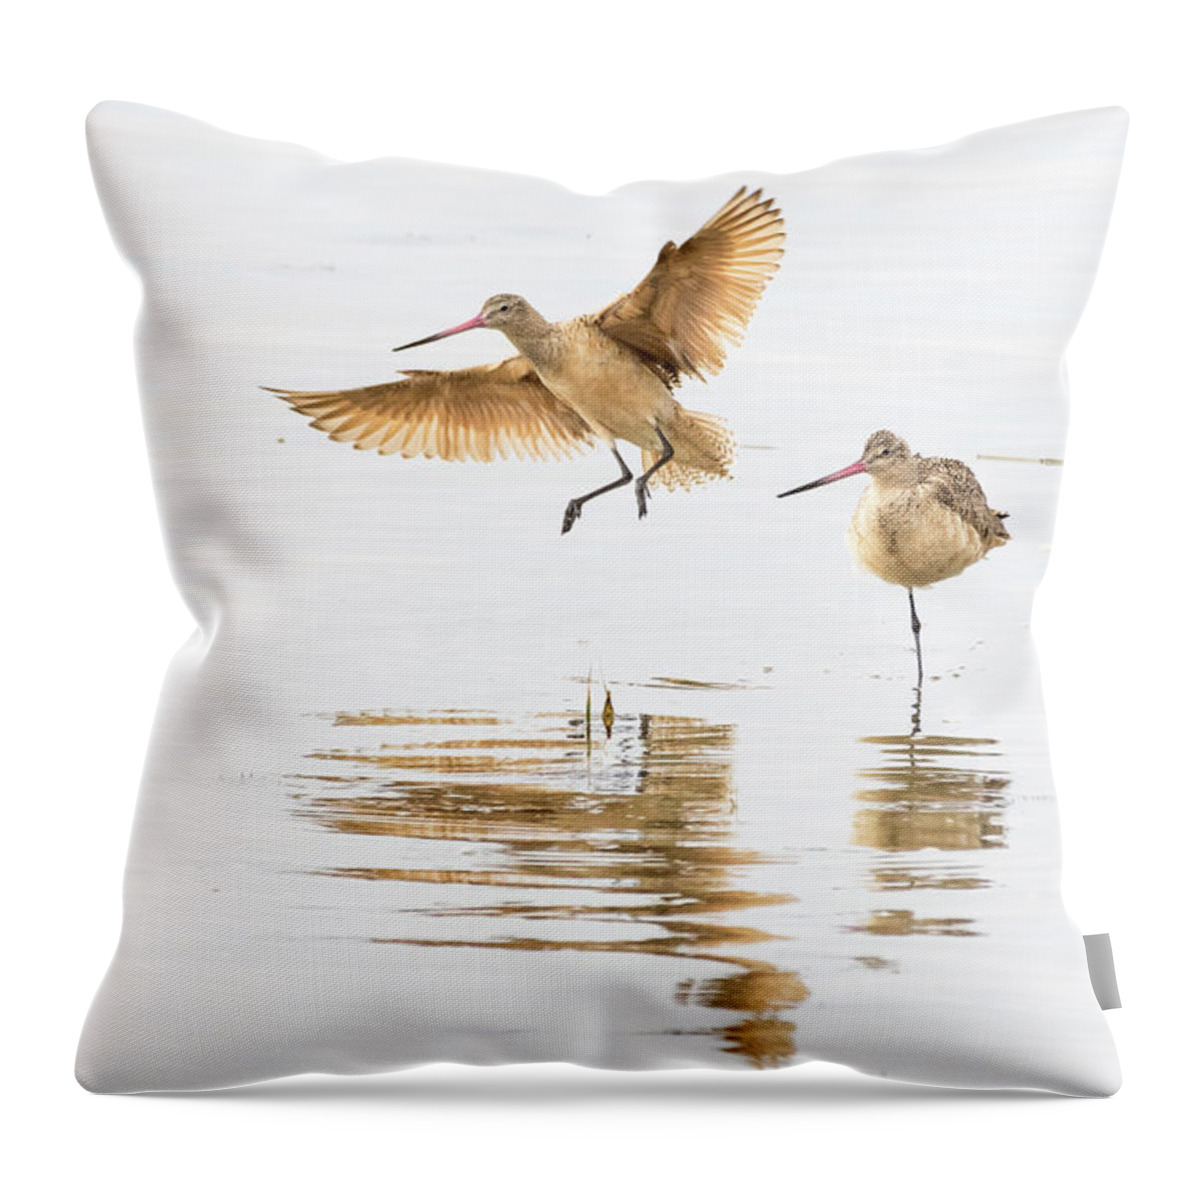  Throw Pillow featuring the photograph Marbled Godwit by Jim Miller